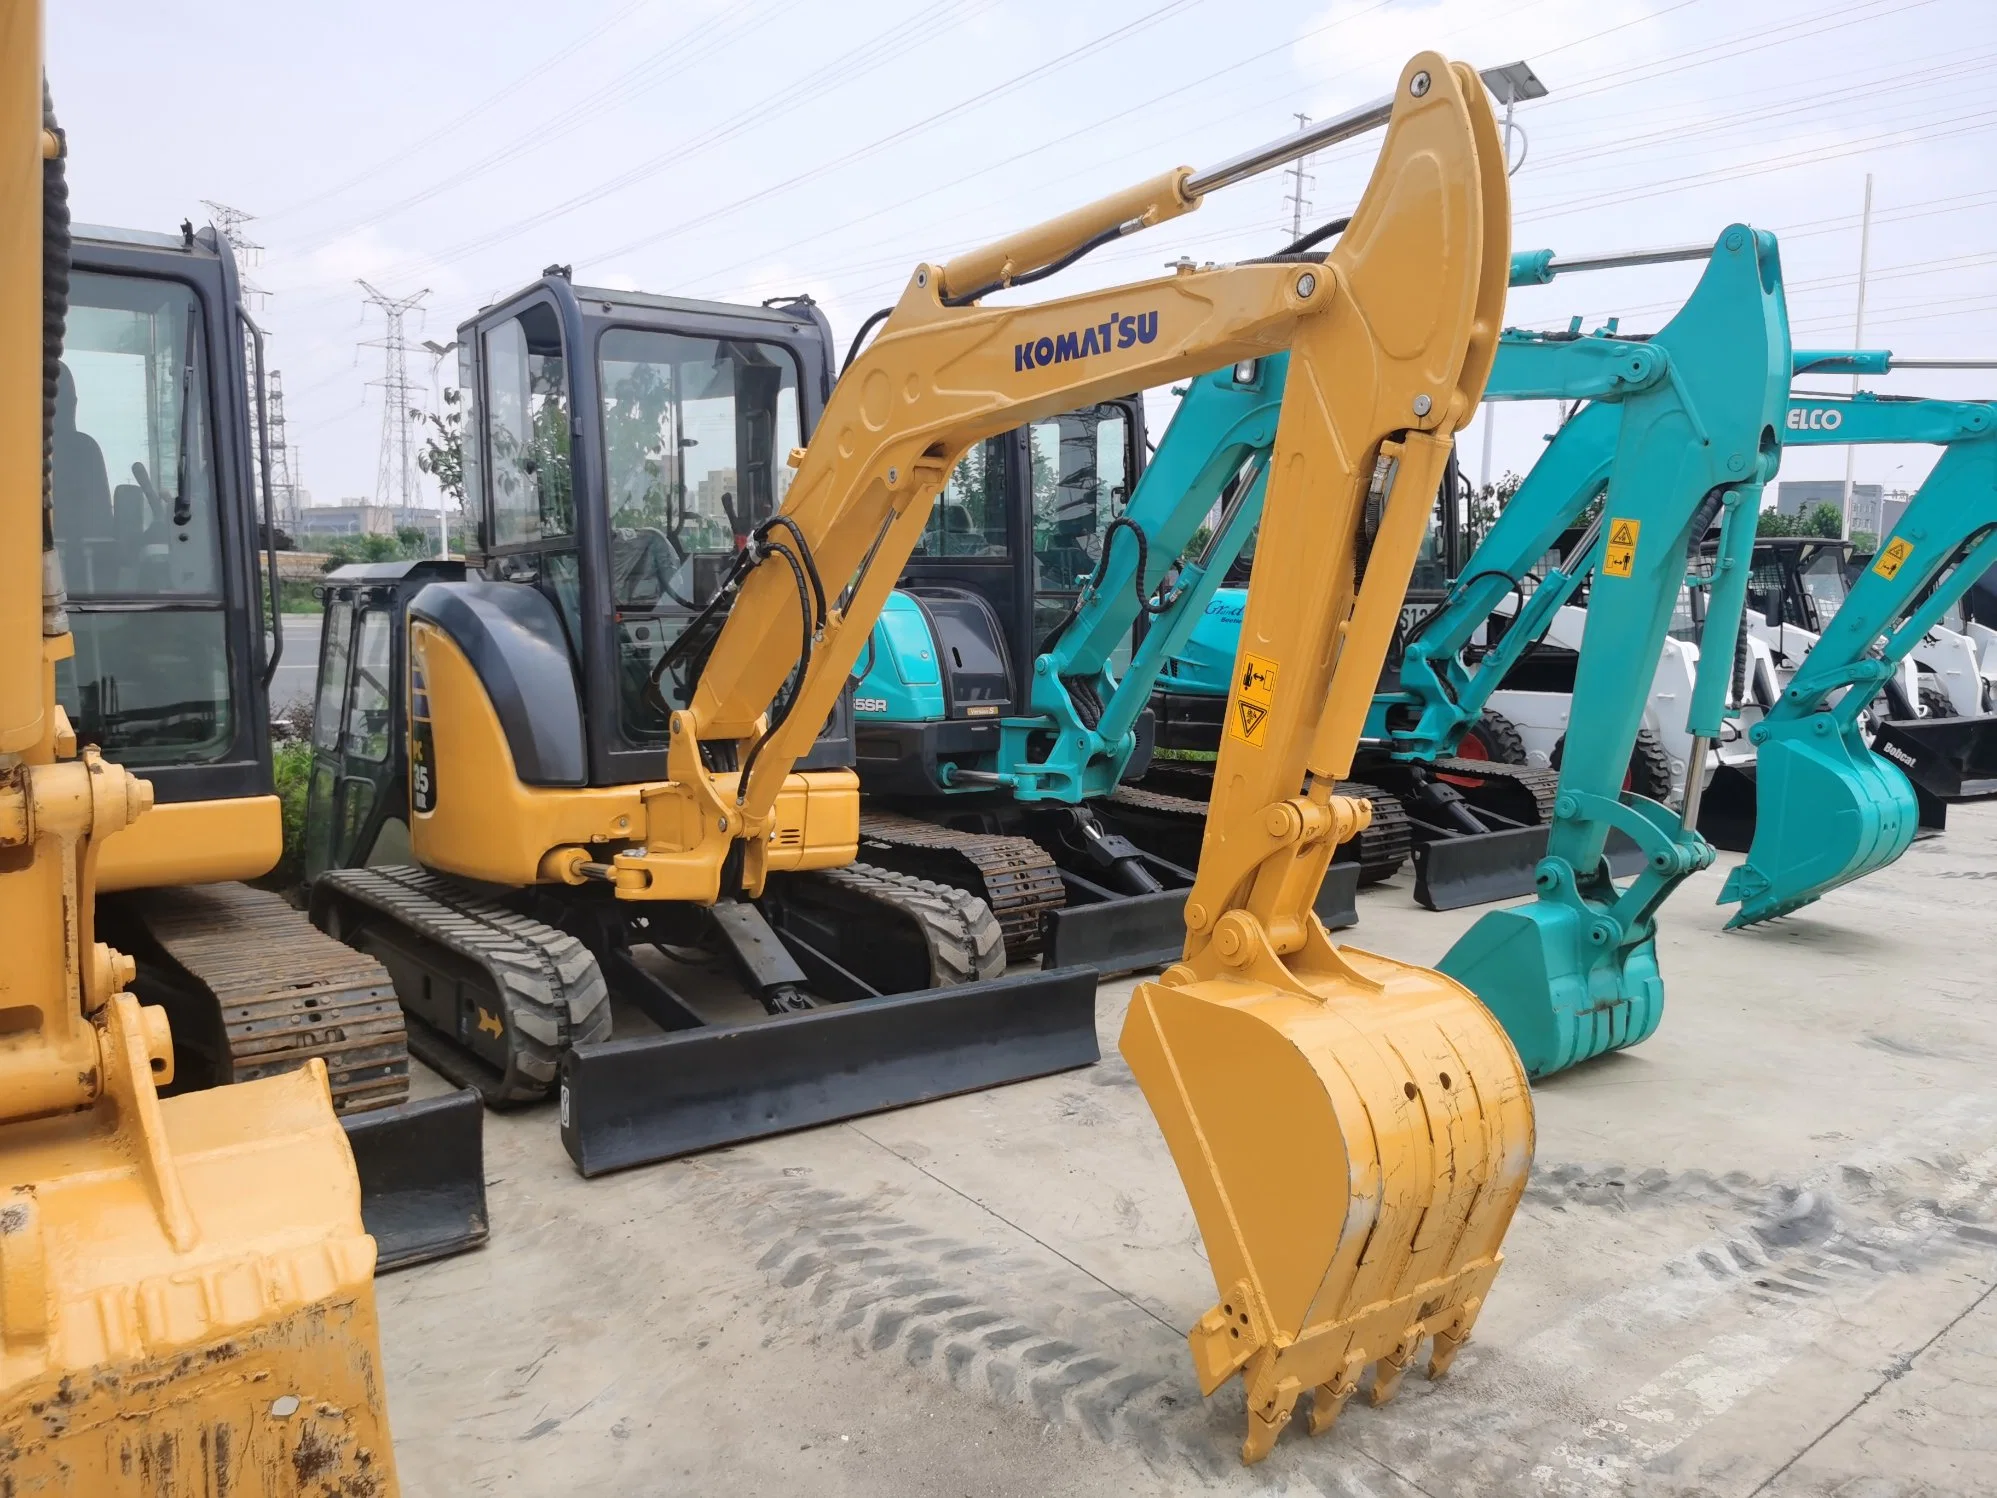 Secondhand Excavator Used Komatsu PC35mr with Good Condition and Reasonable Price for Sale